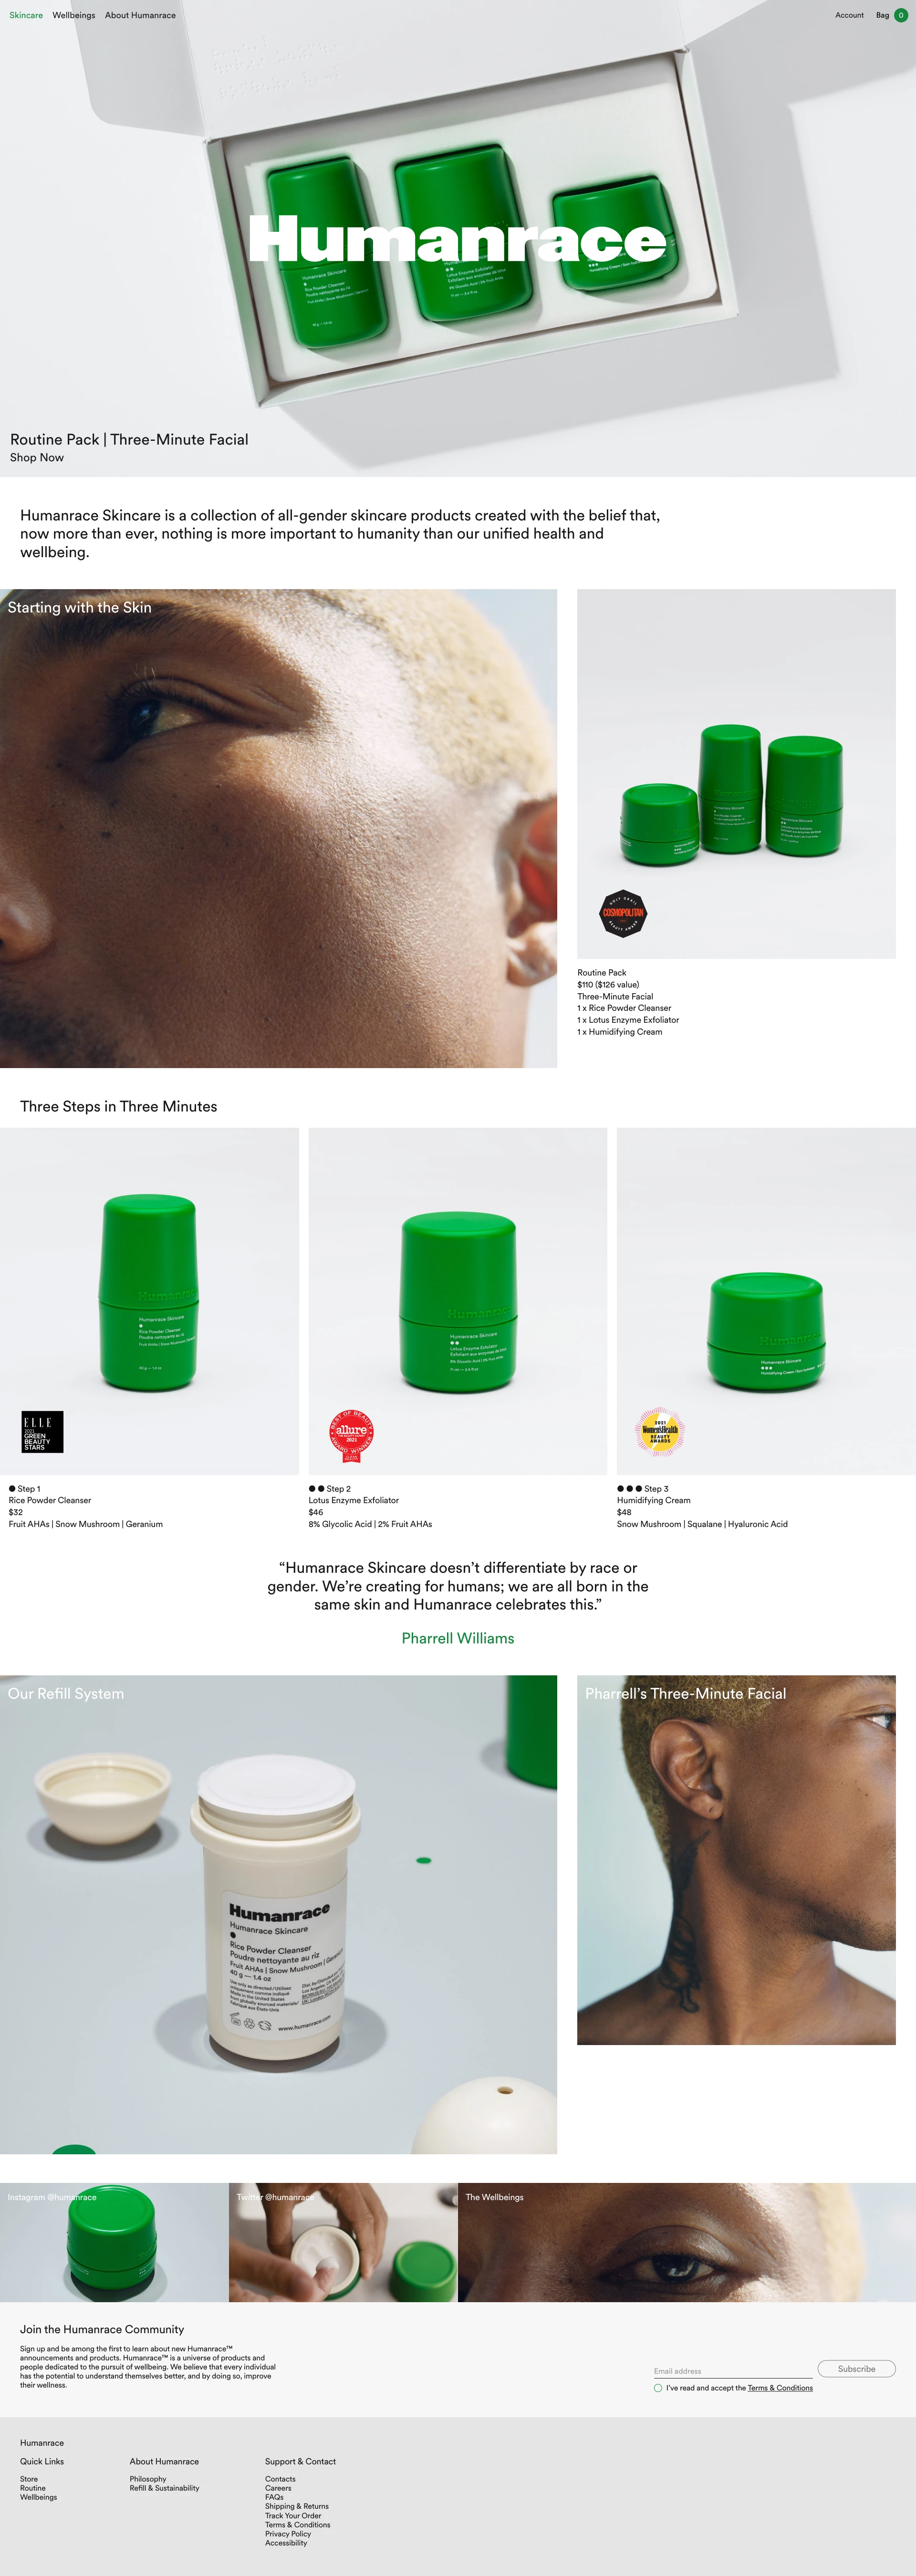 Humanrace Landing Page Example: Humanrace Skincare is a collection of all-gender skincare products created with the belief that, now more than ever, nothing is more important to humanity than our unified health and wellbeing.